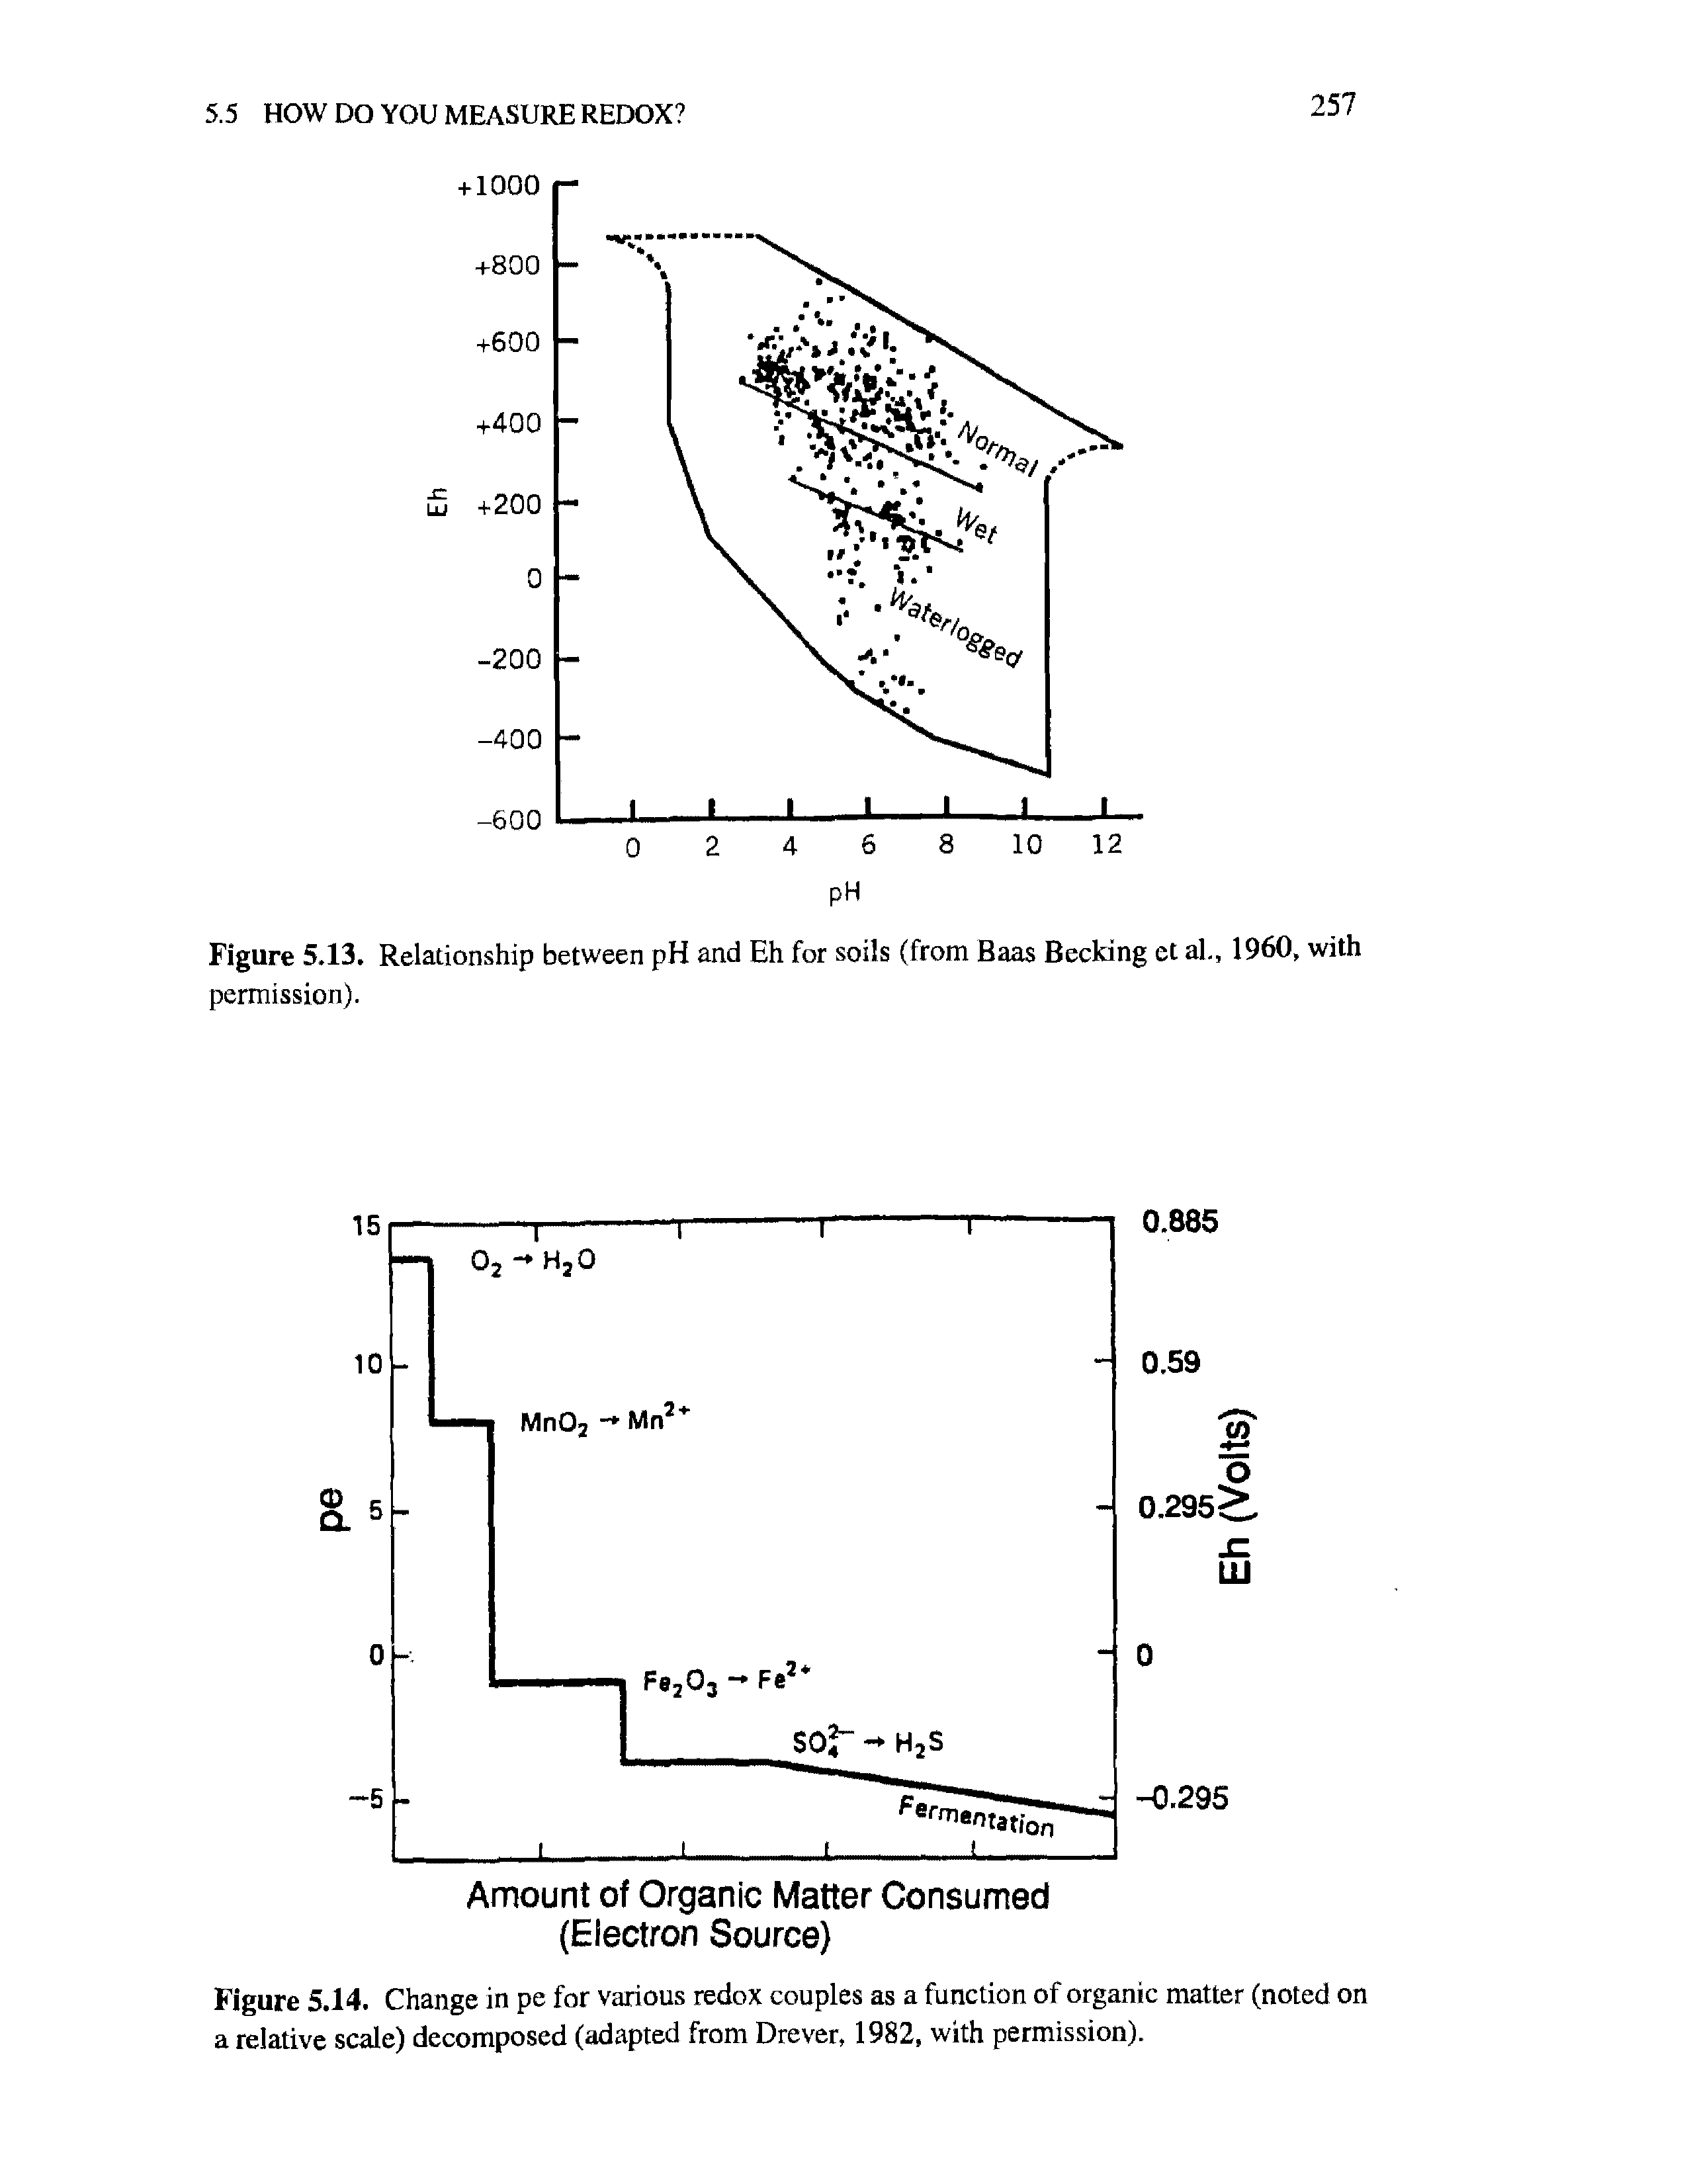 Figure 5.13. Relationship between pH and Eh for soils (from Baas Becking et al., 1960, with permission).